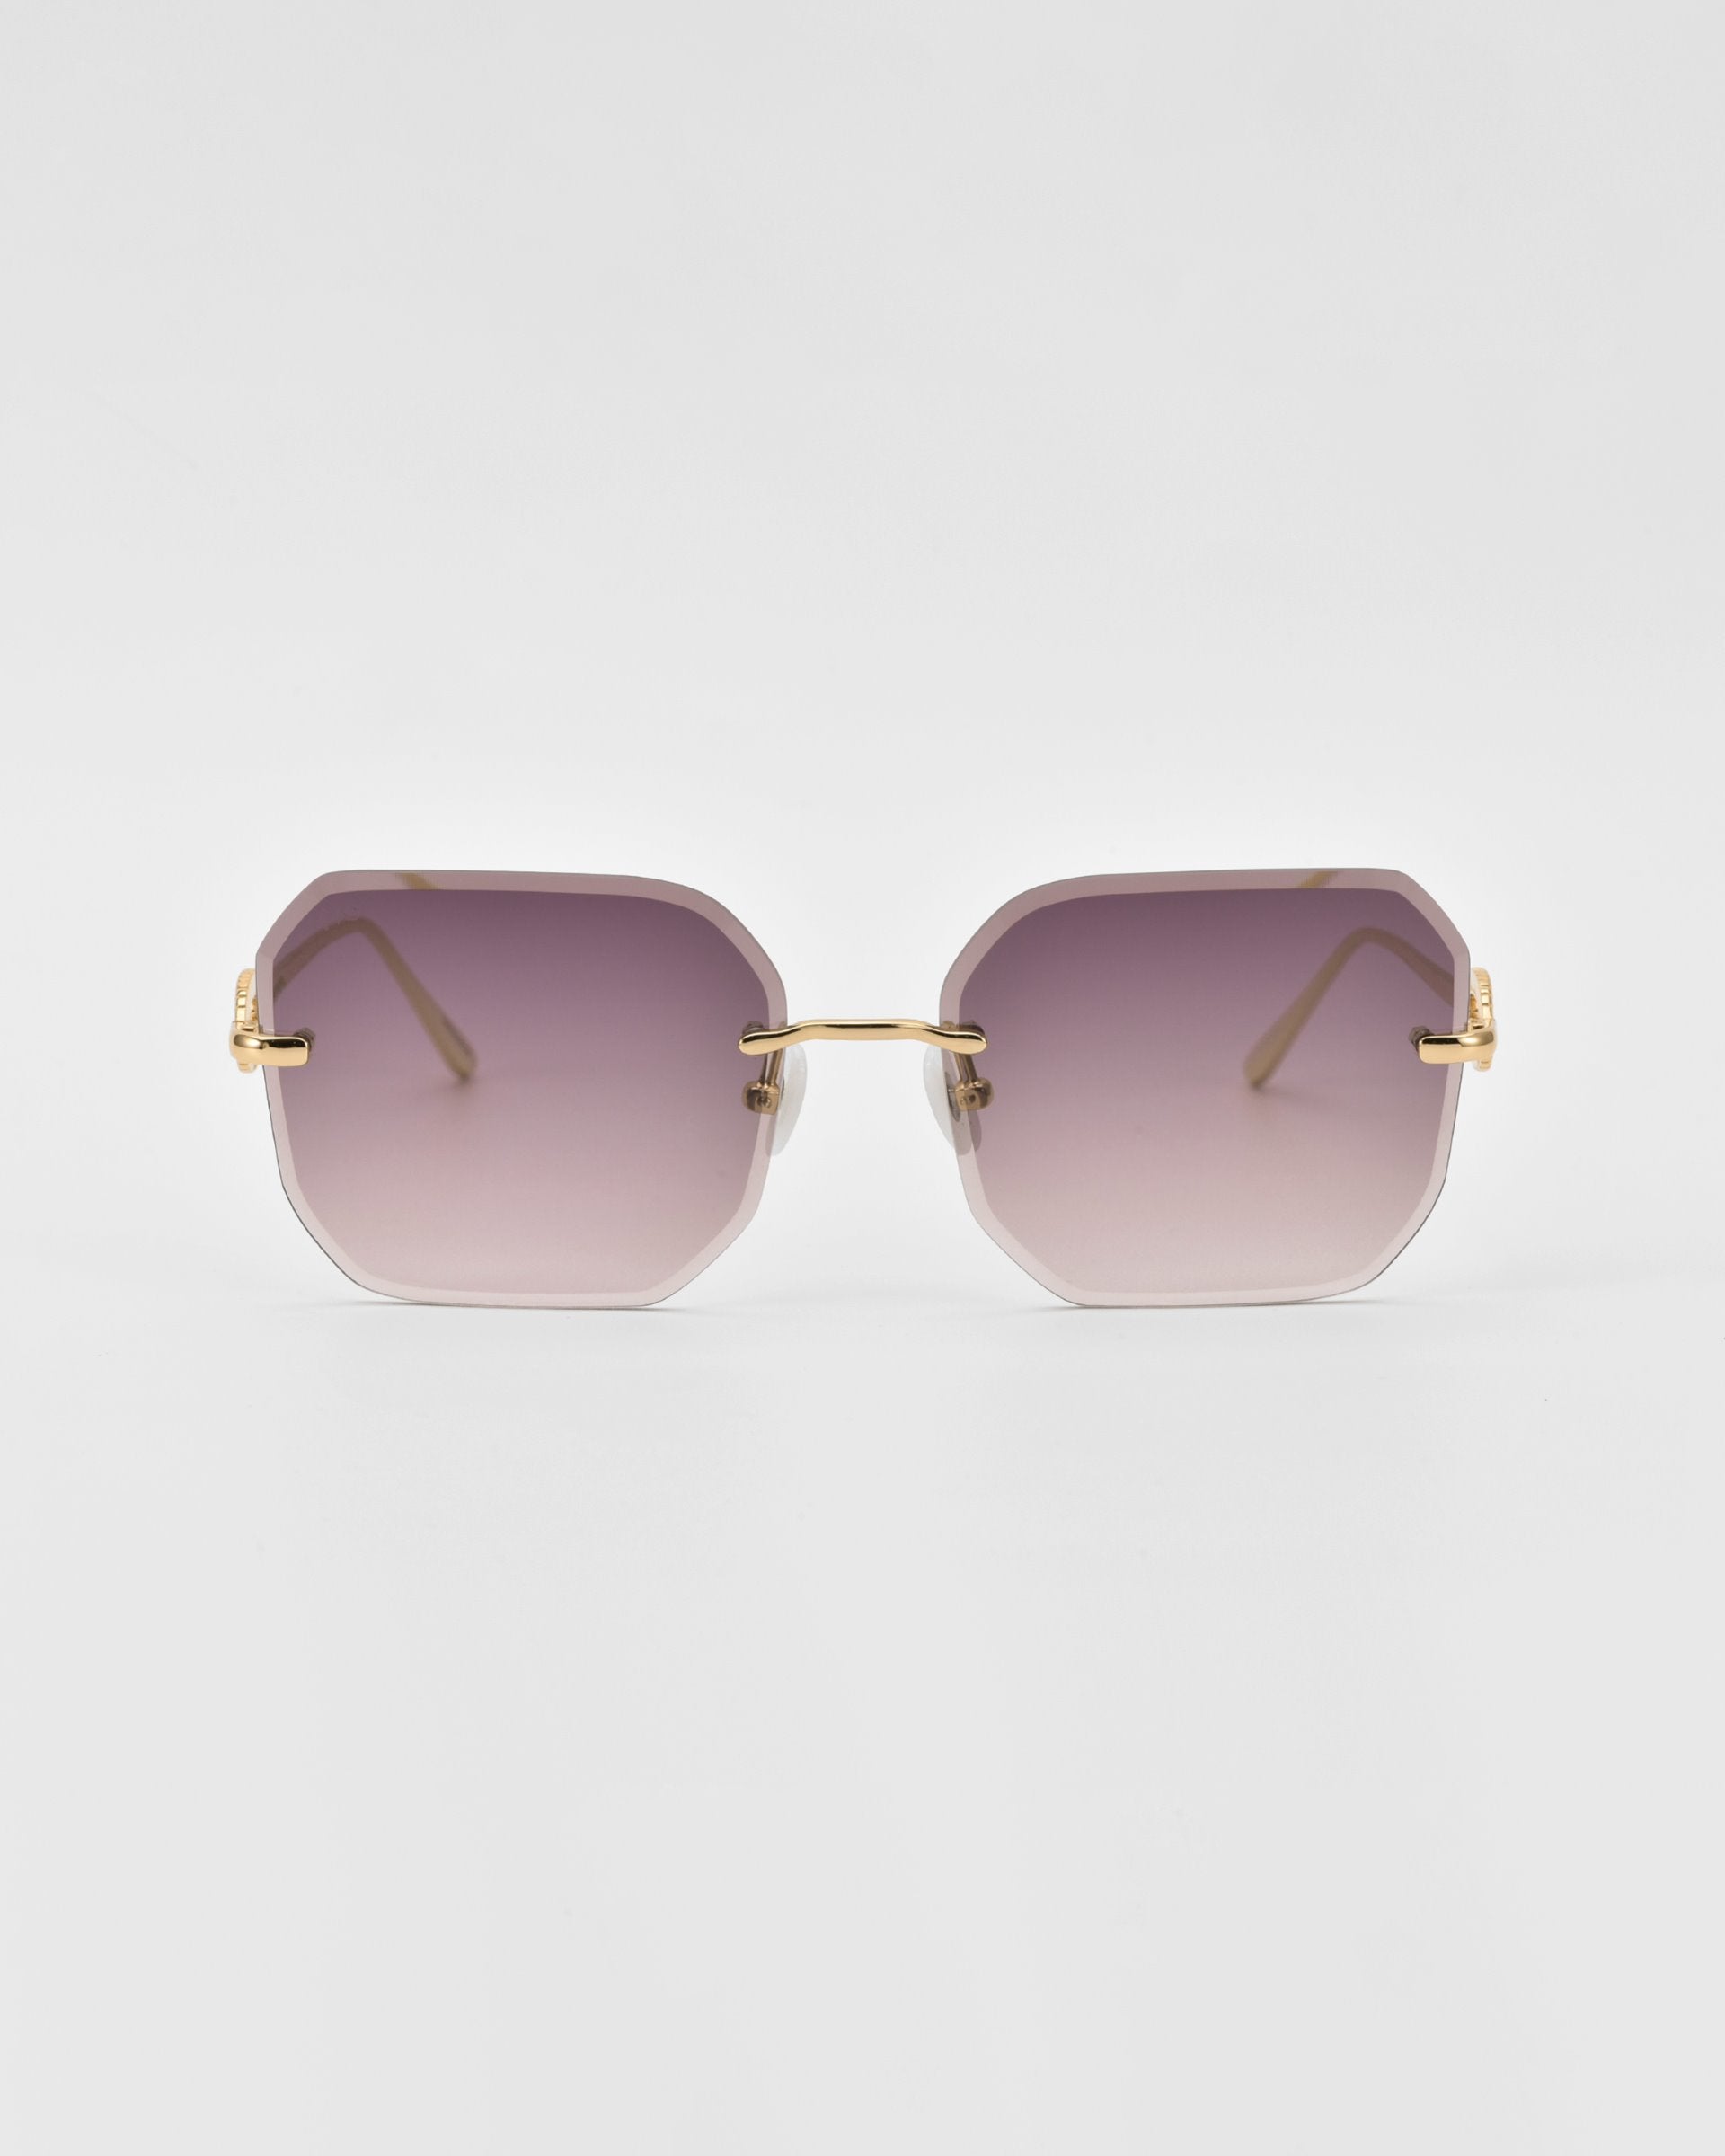 Introducing the For Art&#39;s Sake® Aria sunglasses, a pair of stylish, rimless shades with purple gradient lenses and gold temples. The design features geometric, slightly rounded square lenses and jade-stone nose pads for added comfort.